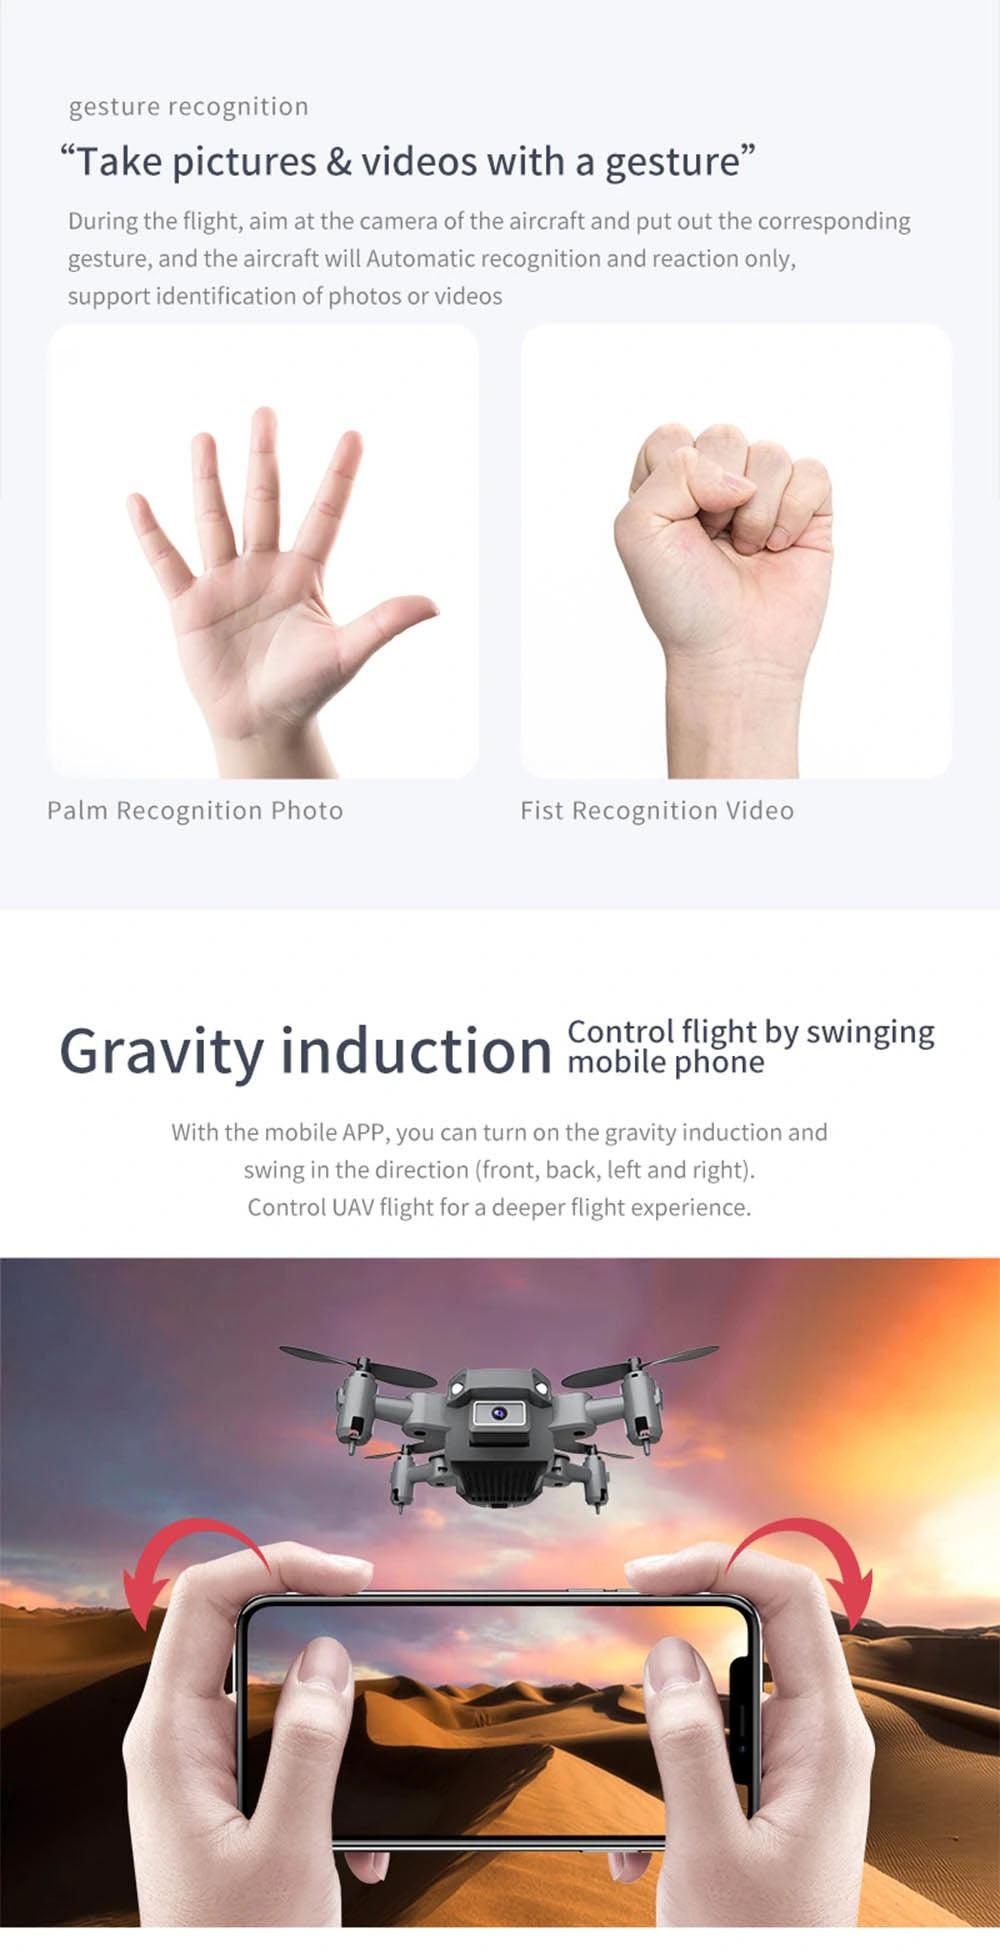 KY905 Mini Drone, gesture recognition "take pictures & videos with a gesture" the